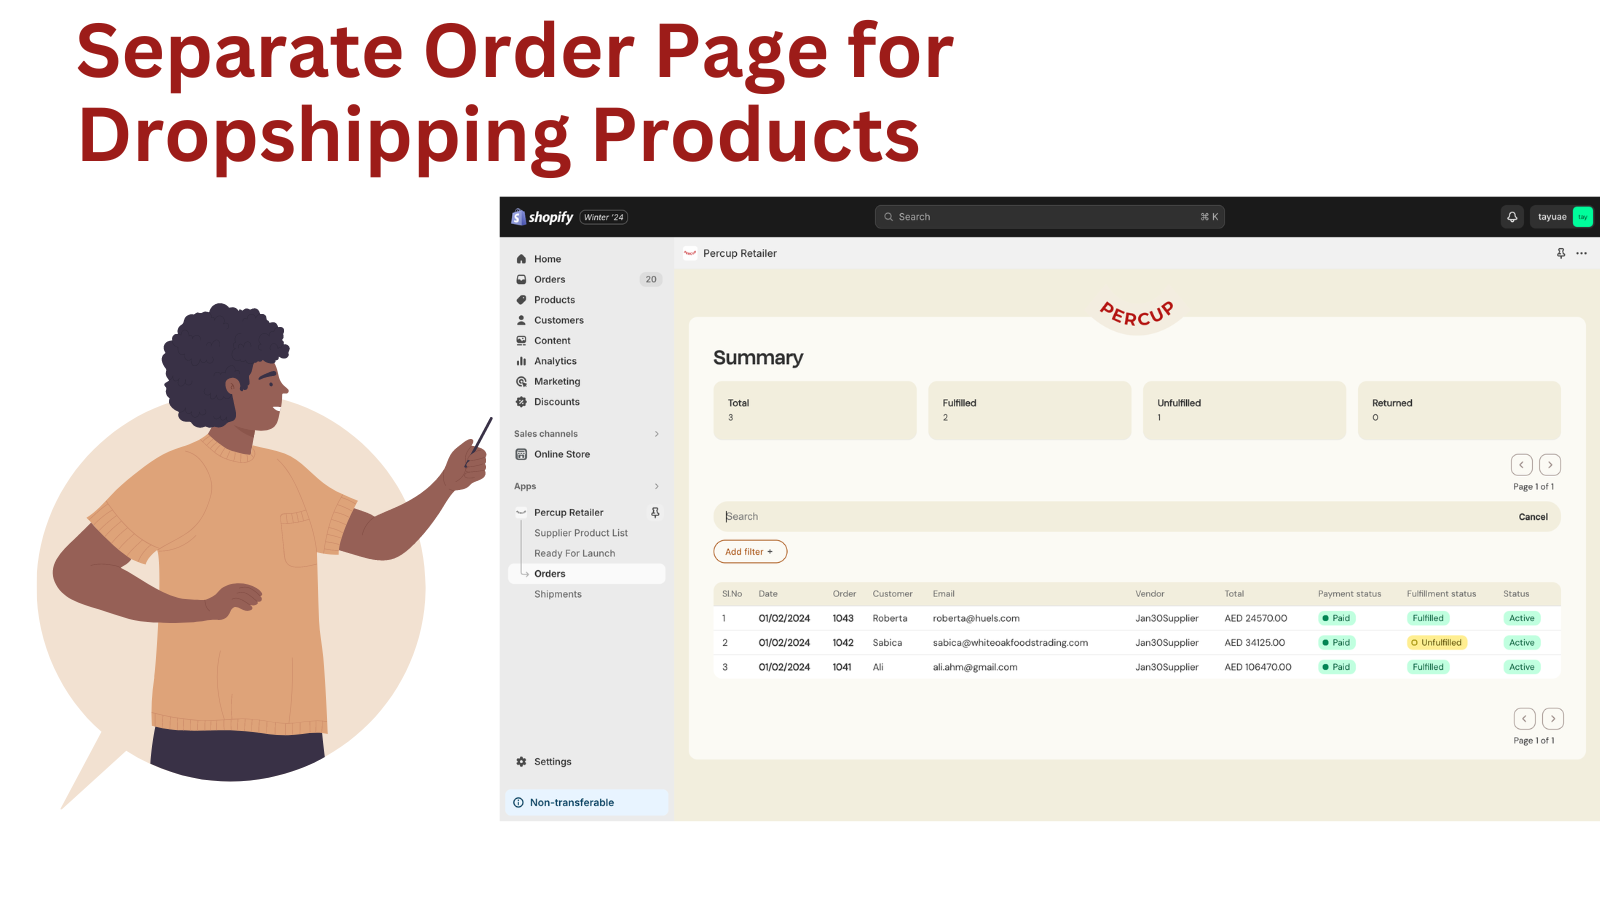 Separate Order Page for Dropshipping Products